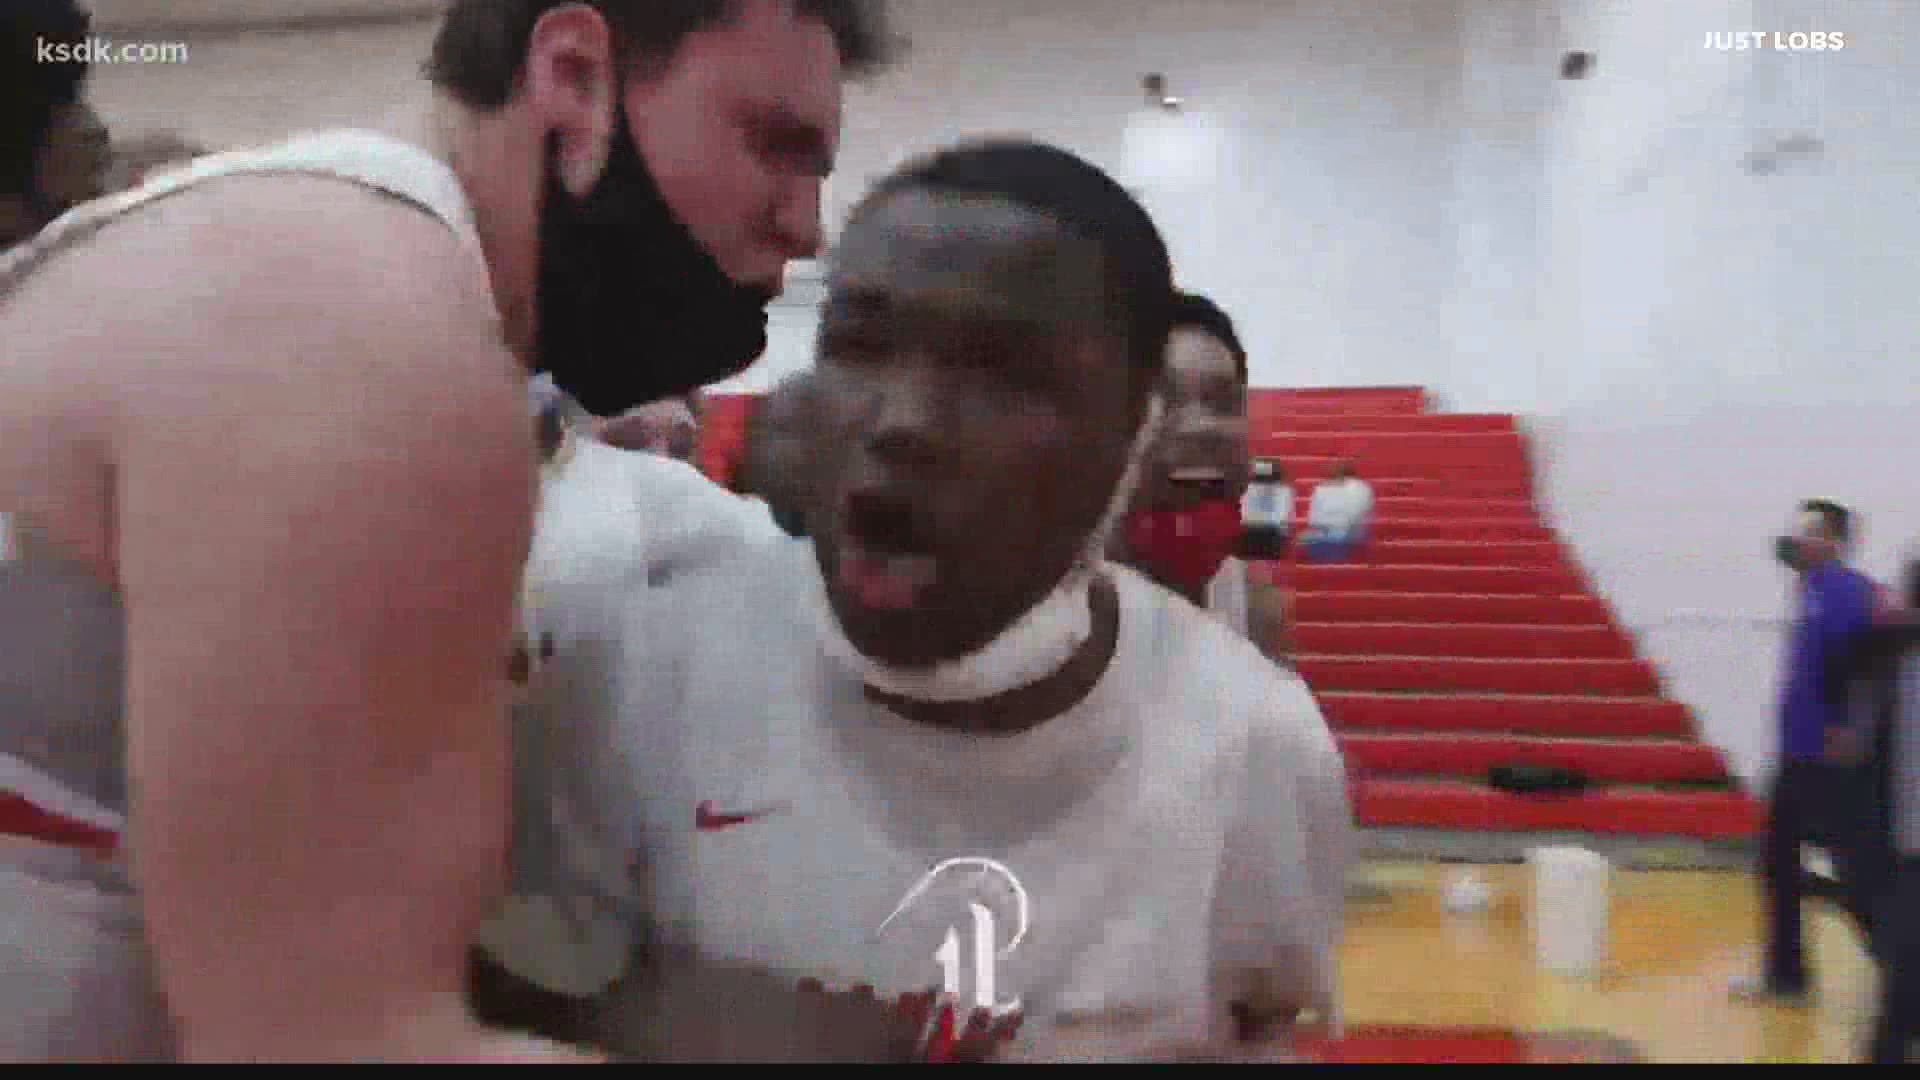 One of the wildest endings in recent memory gave Chaminade a district title over their rivals at CBC.